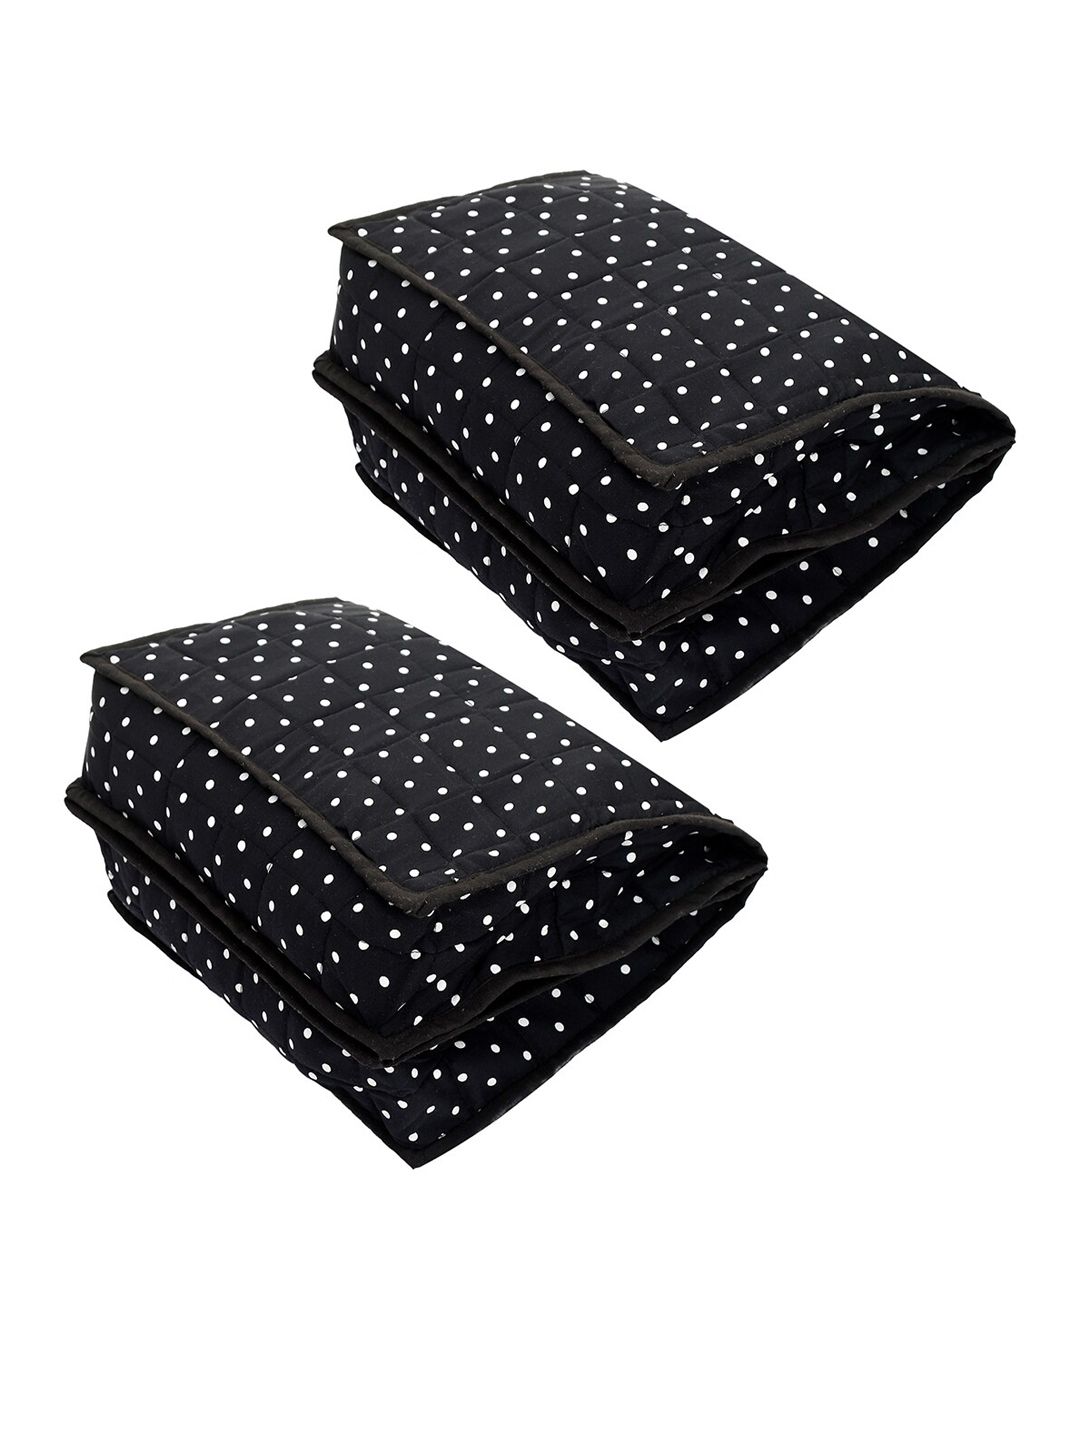 Kuber Industries Black Set Of 2 Polka Dot Printed Cotton Foldable Organisers Price in India